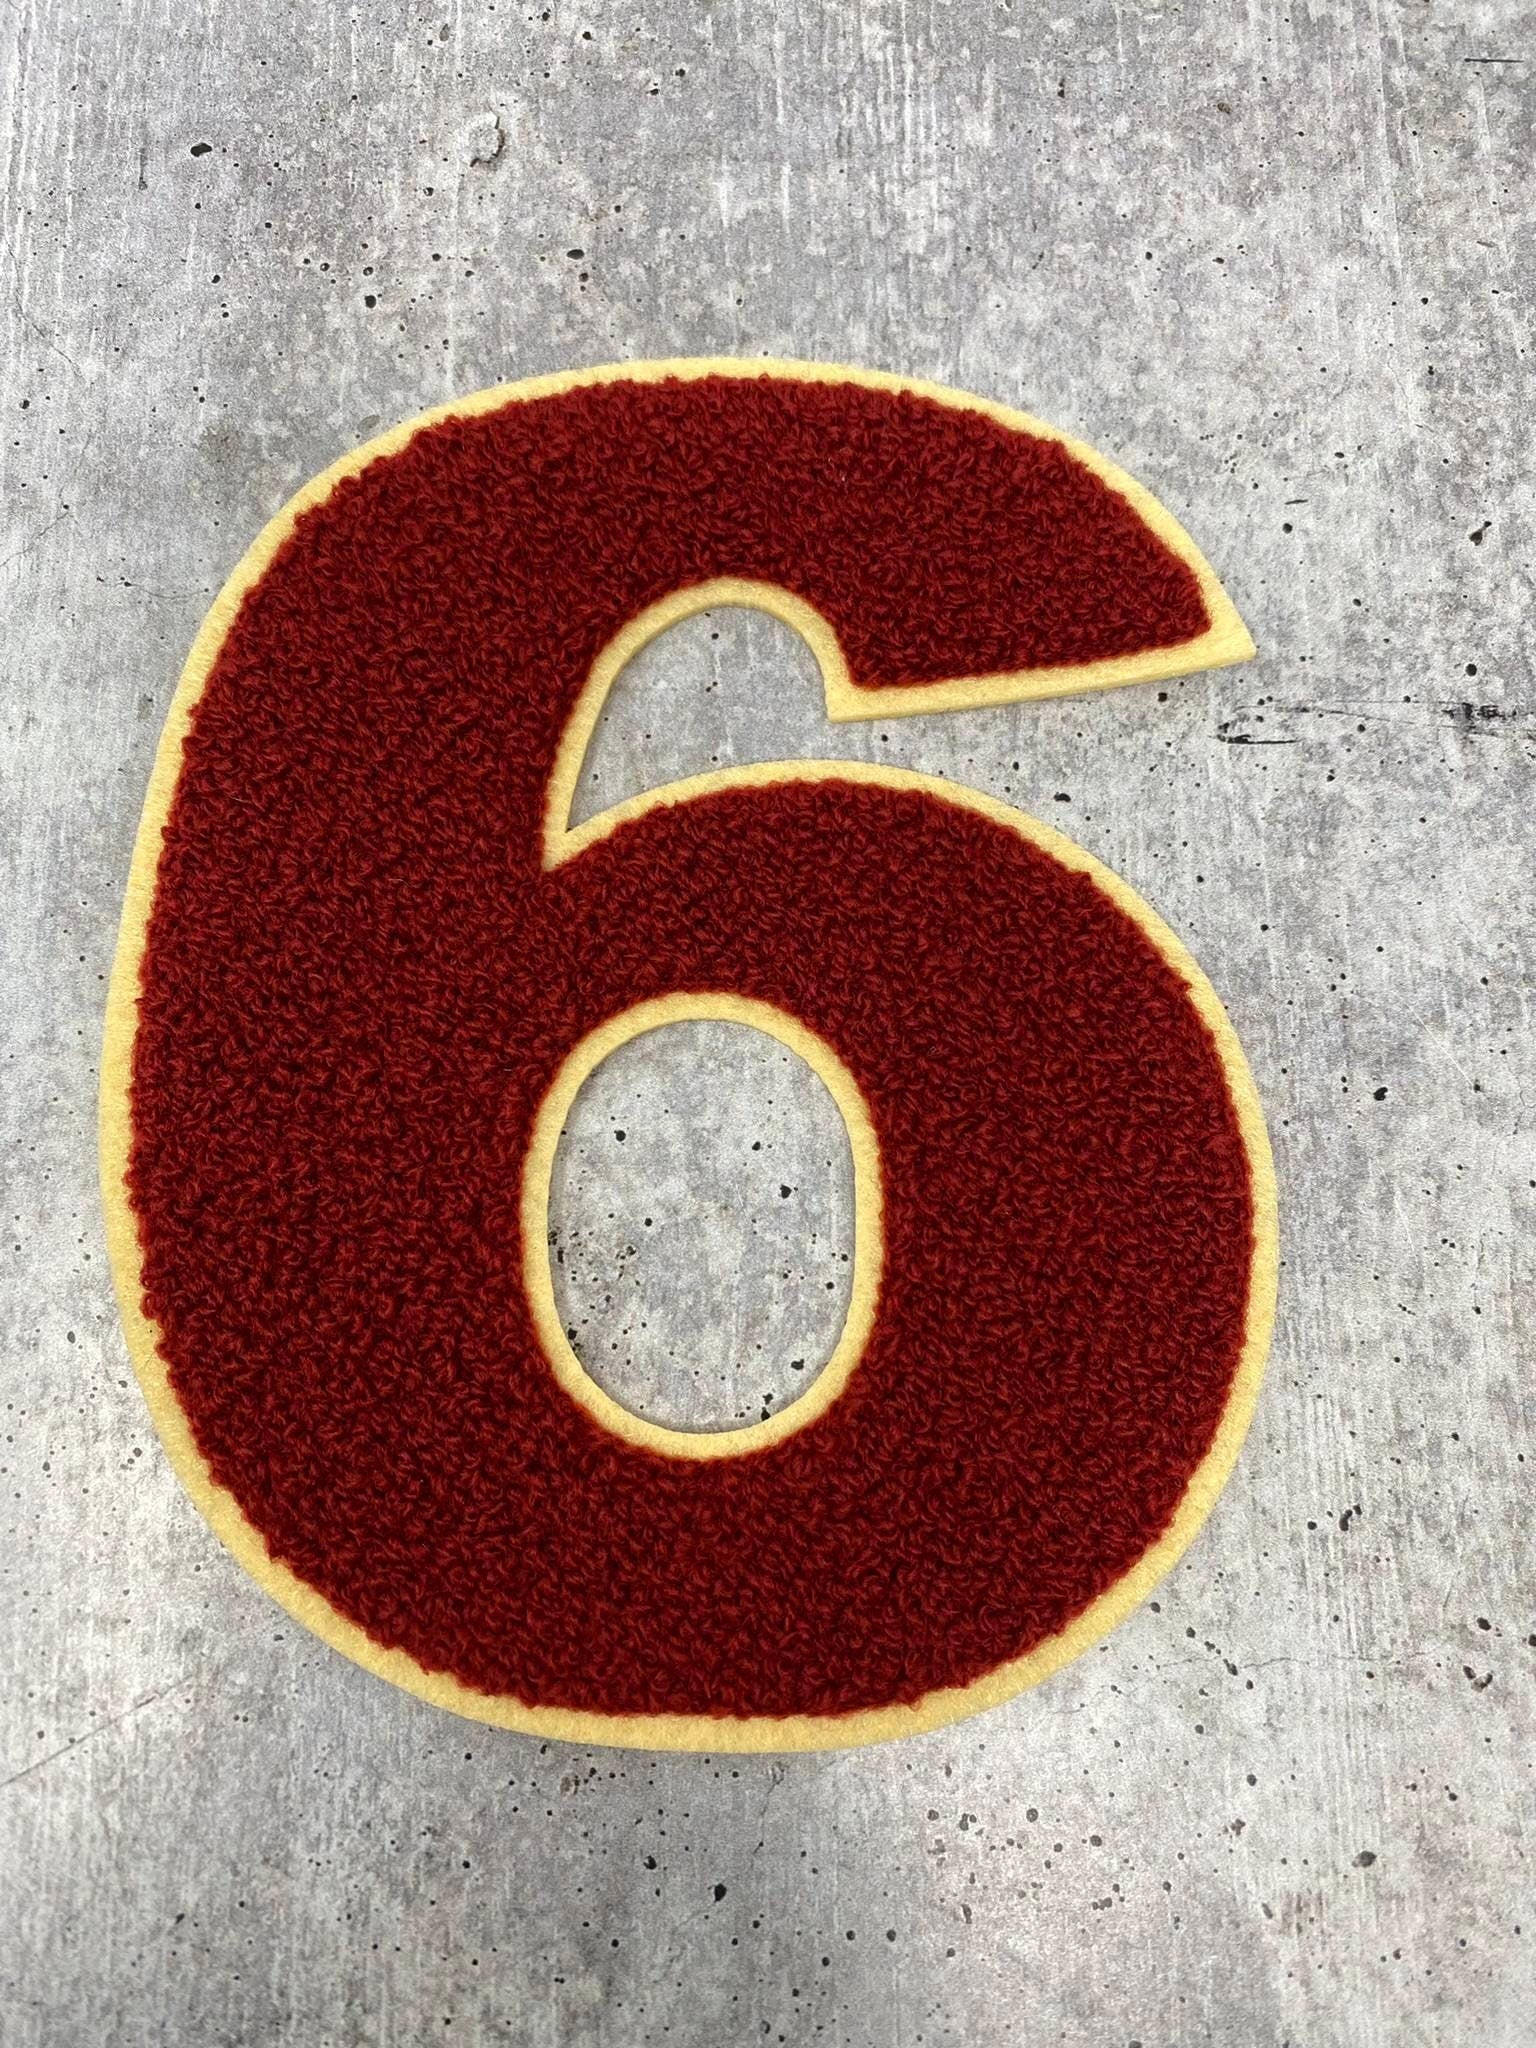 Numbers: 6" Large "Burgundy/Beige" Varsity Patches, Chenille w/Felt Letters, 1-pc, Choose Your Letter, 0 to 9 Patch, Iron-on, Jacket Patch